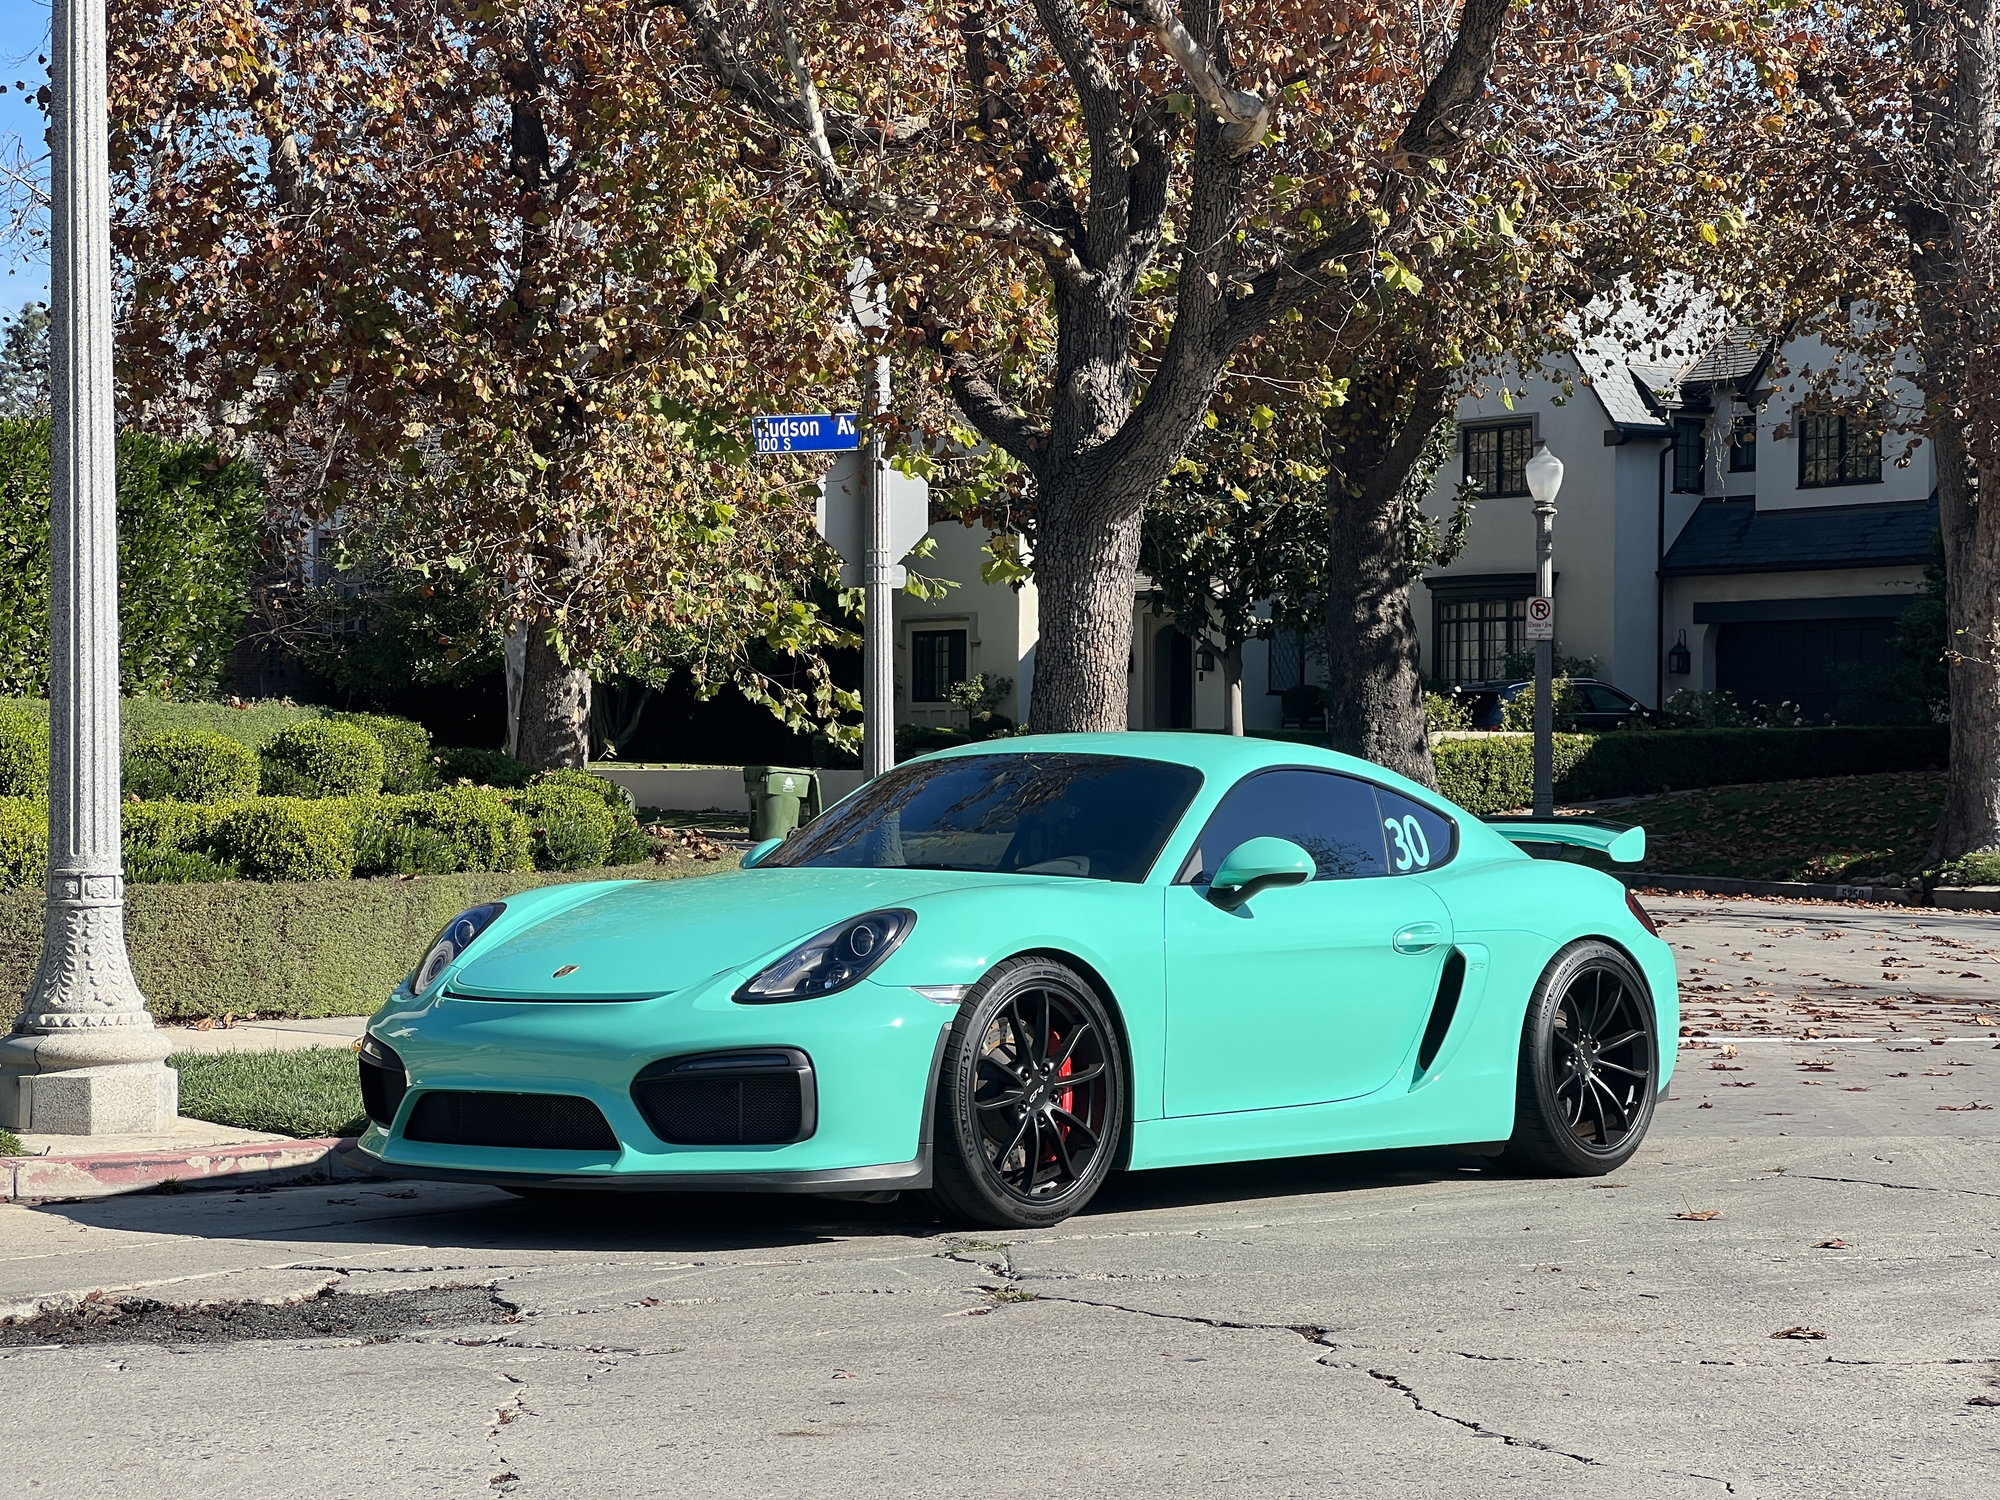 2016 Porsche Cayman GT4 - FS: 2016 Mint Green GT4! 1 of 2 PTS - Used - VIN WP0AC2A84GK192291 - 16,500 Miles - 6 cyl - 2WD - Manual - Coupe - Other - Los Angeles, CA 90004, United States